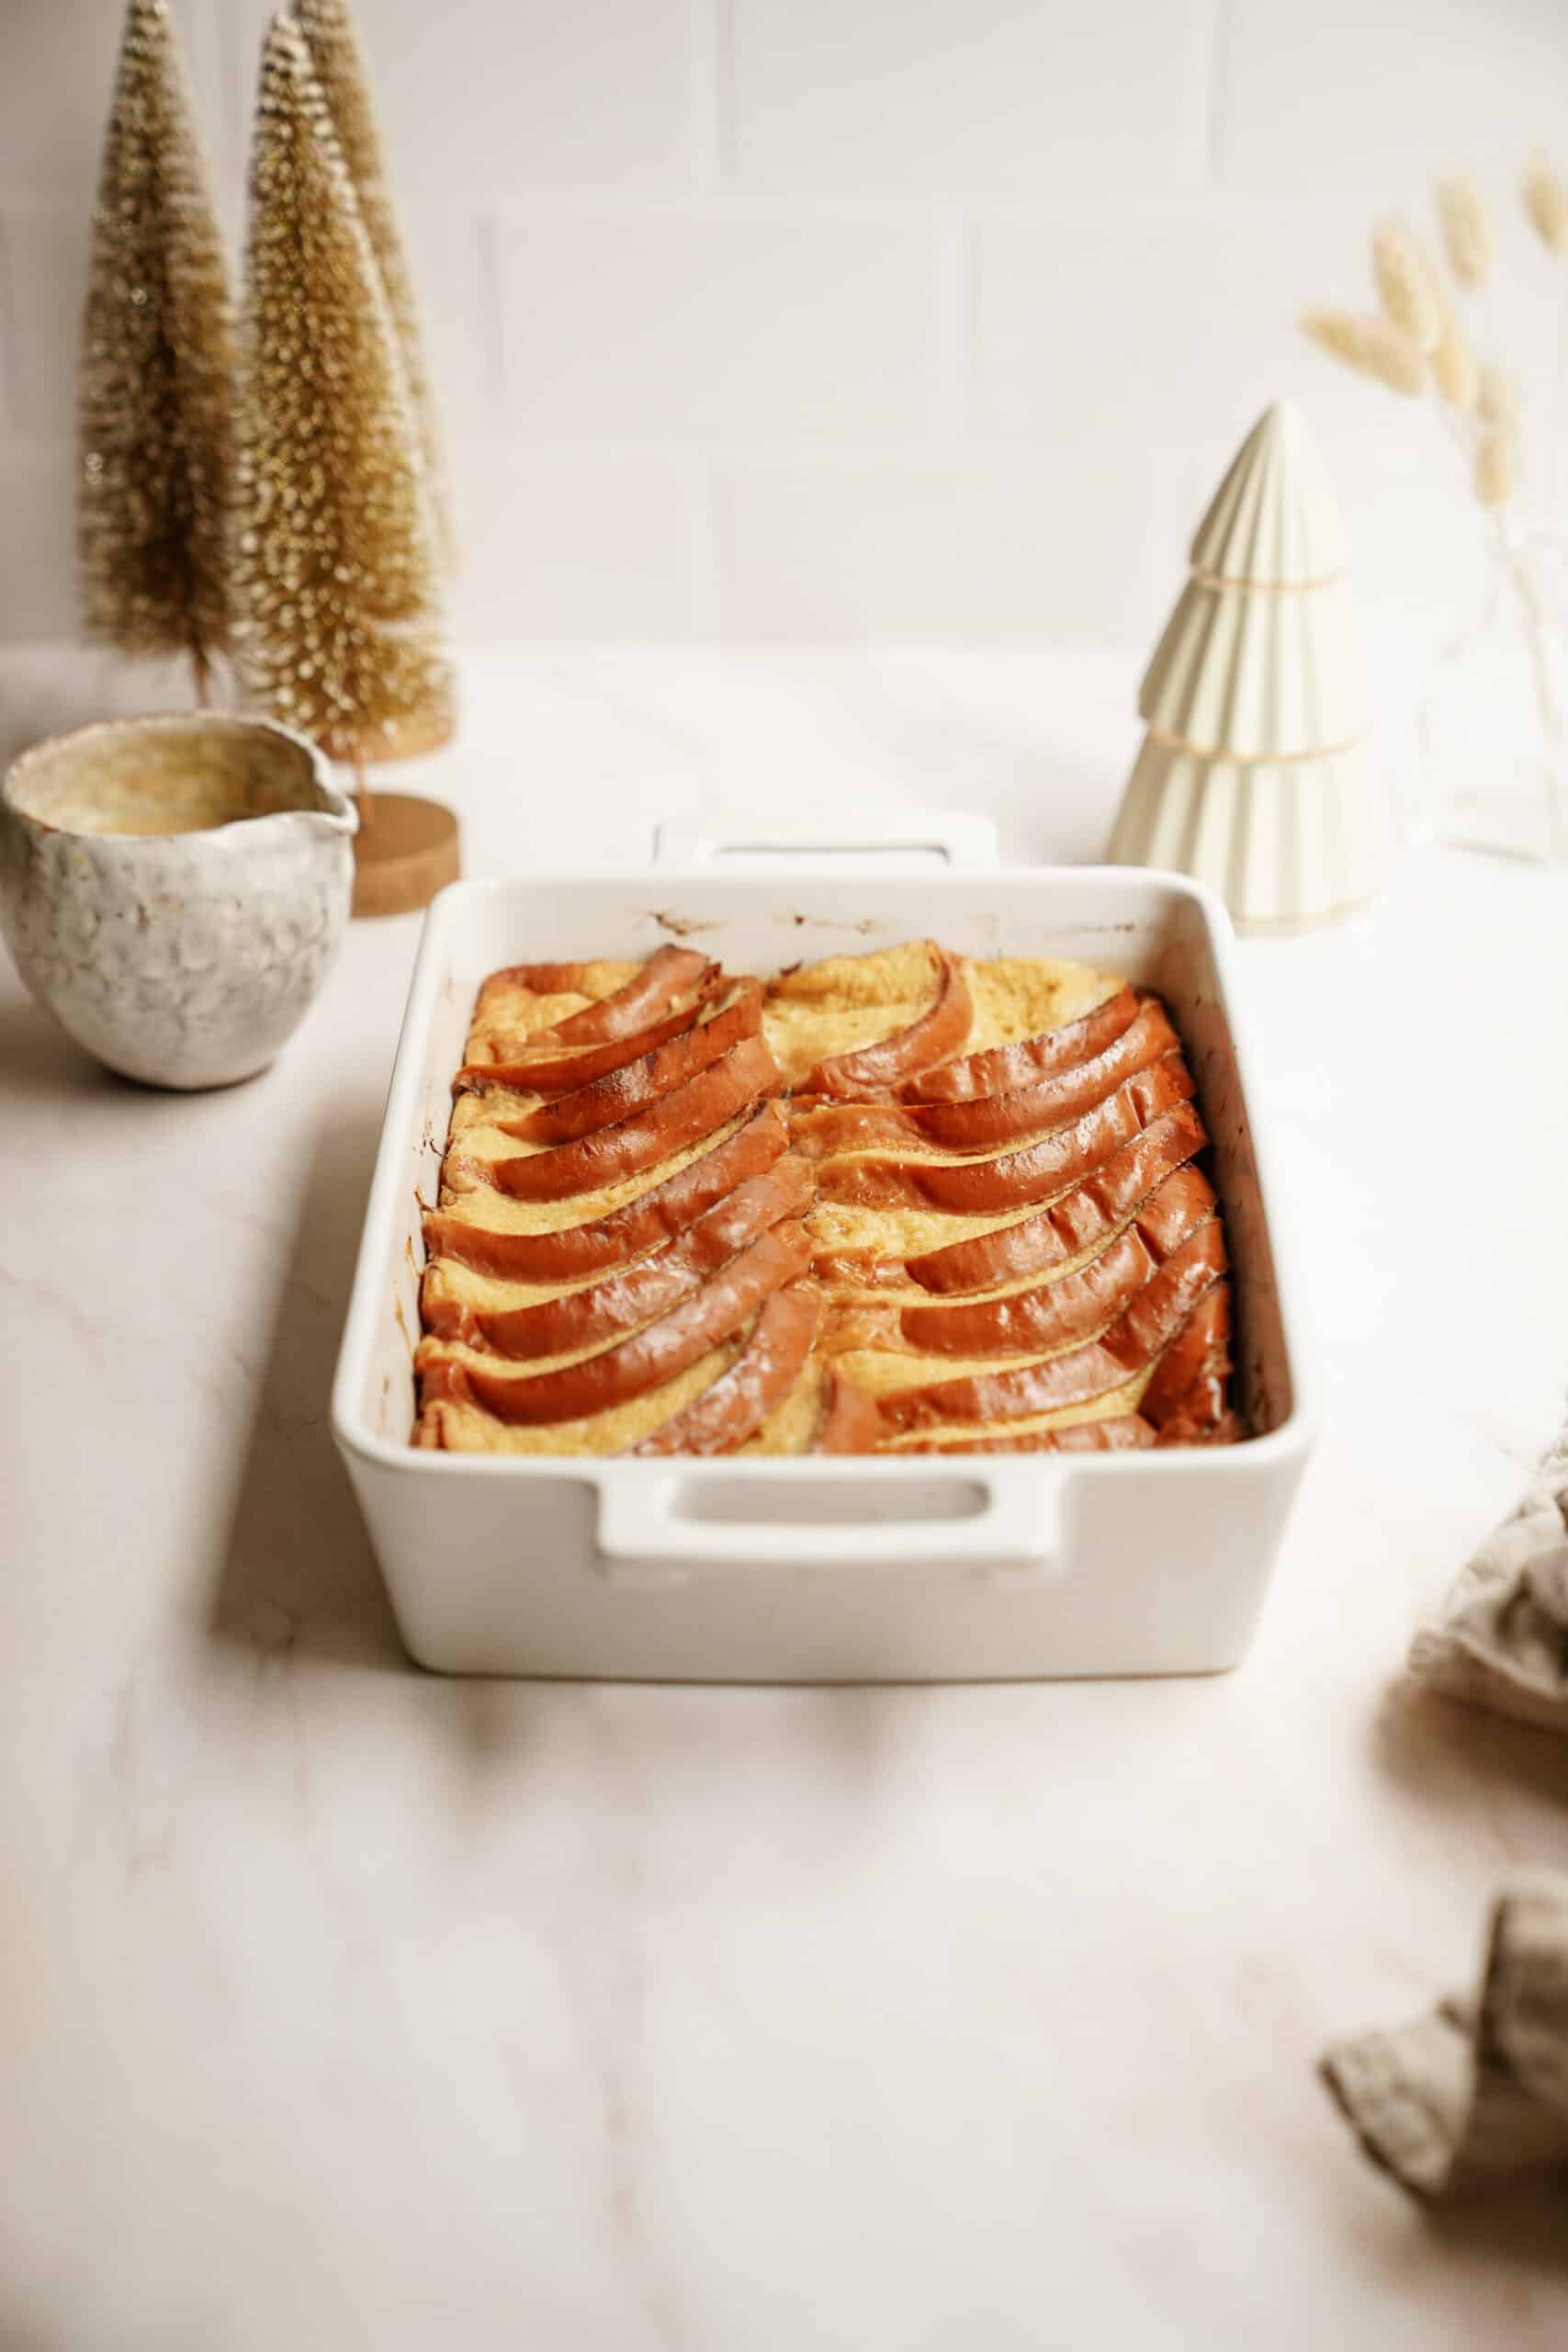 Baked French Toast Recipe in white casserole dish